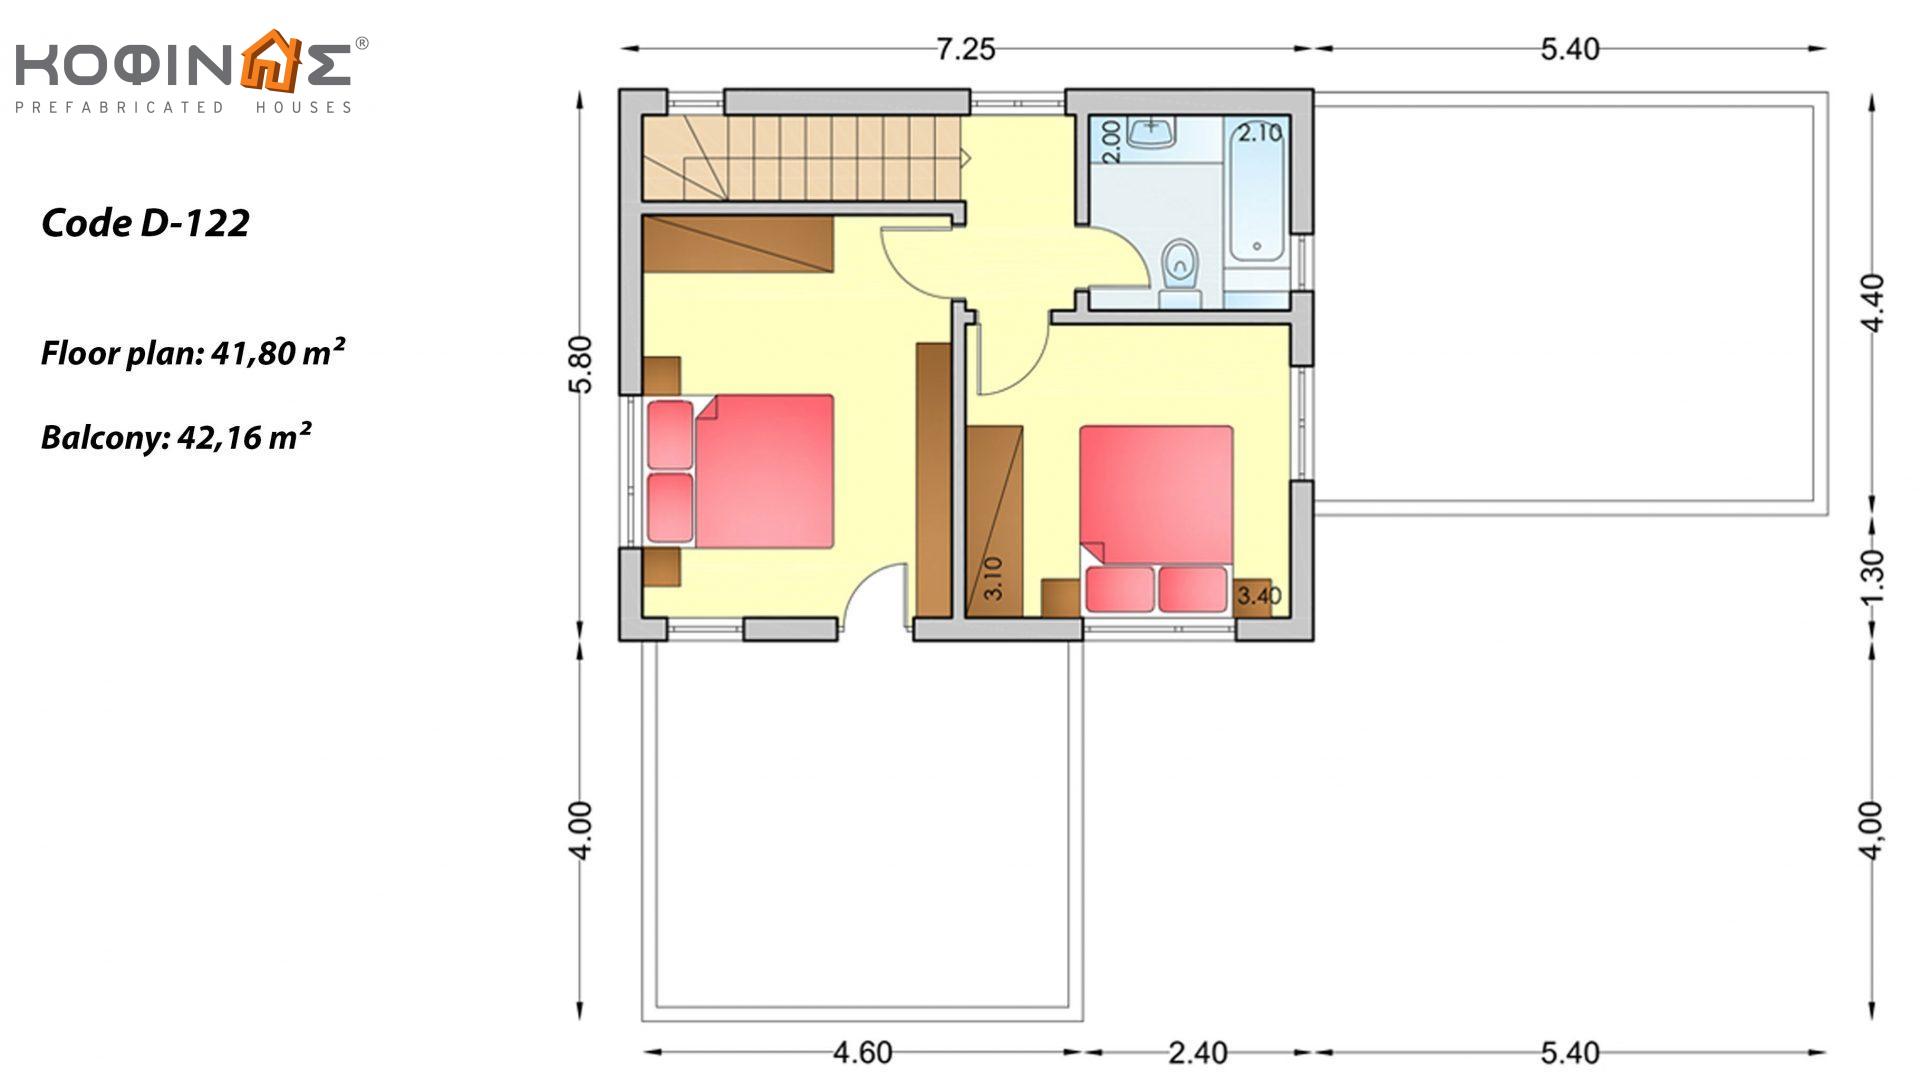 2-story house D-122, total surface of 122,60 m²,covered roofed areas 18,65 m²,balconies 42,16 m²